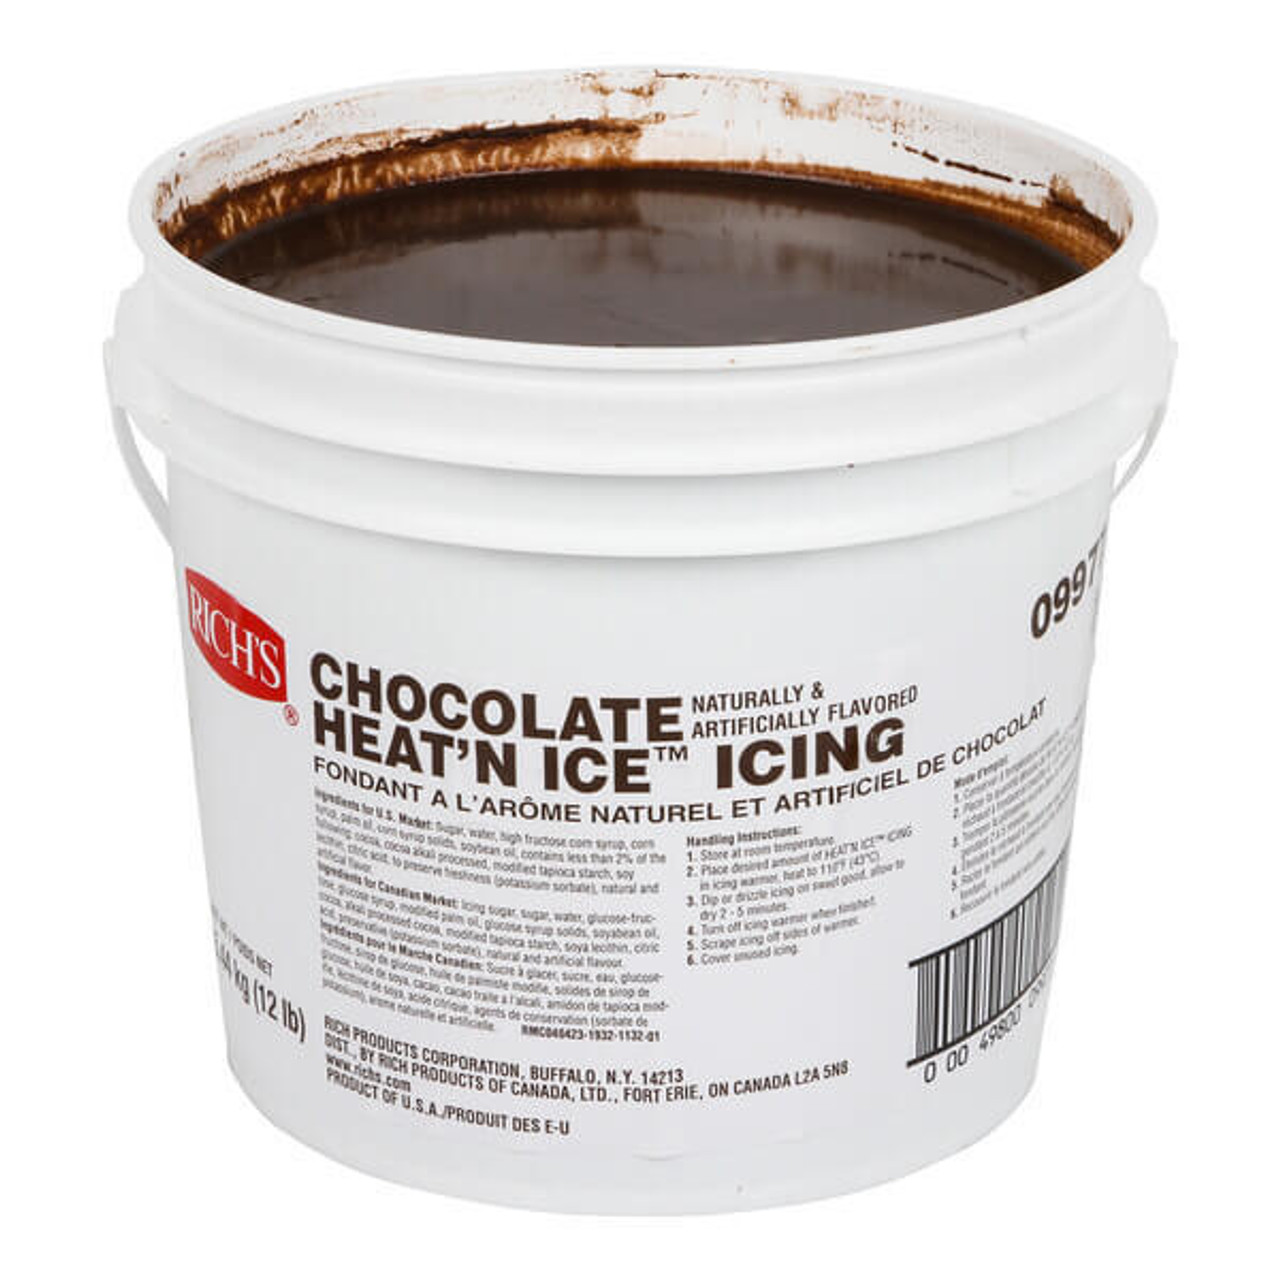  Rich's Chocolate Heat 'n Ice Donut & Roll Icing 12 lbs. Pail Rich Chocolate 